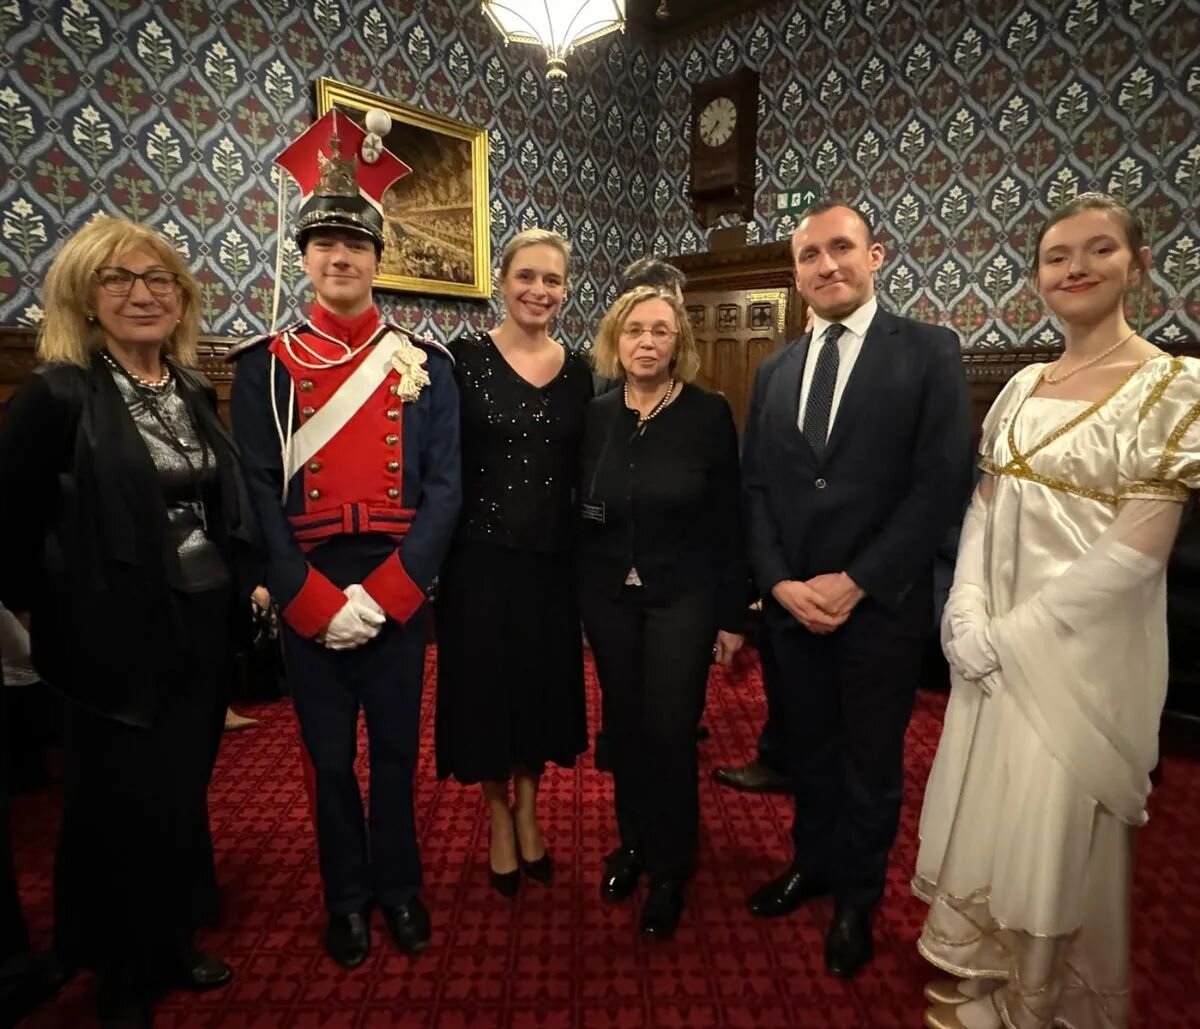 The inauguration of the 52nd Bal Polski top place at the Palace of Westminster! 🇵🇱💃🏻

Mazury will have the pleasure of performing and leading the polonaise at this year's ball! During the inauguration we showcased the costumes we will be wearing 